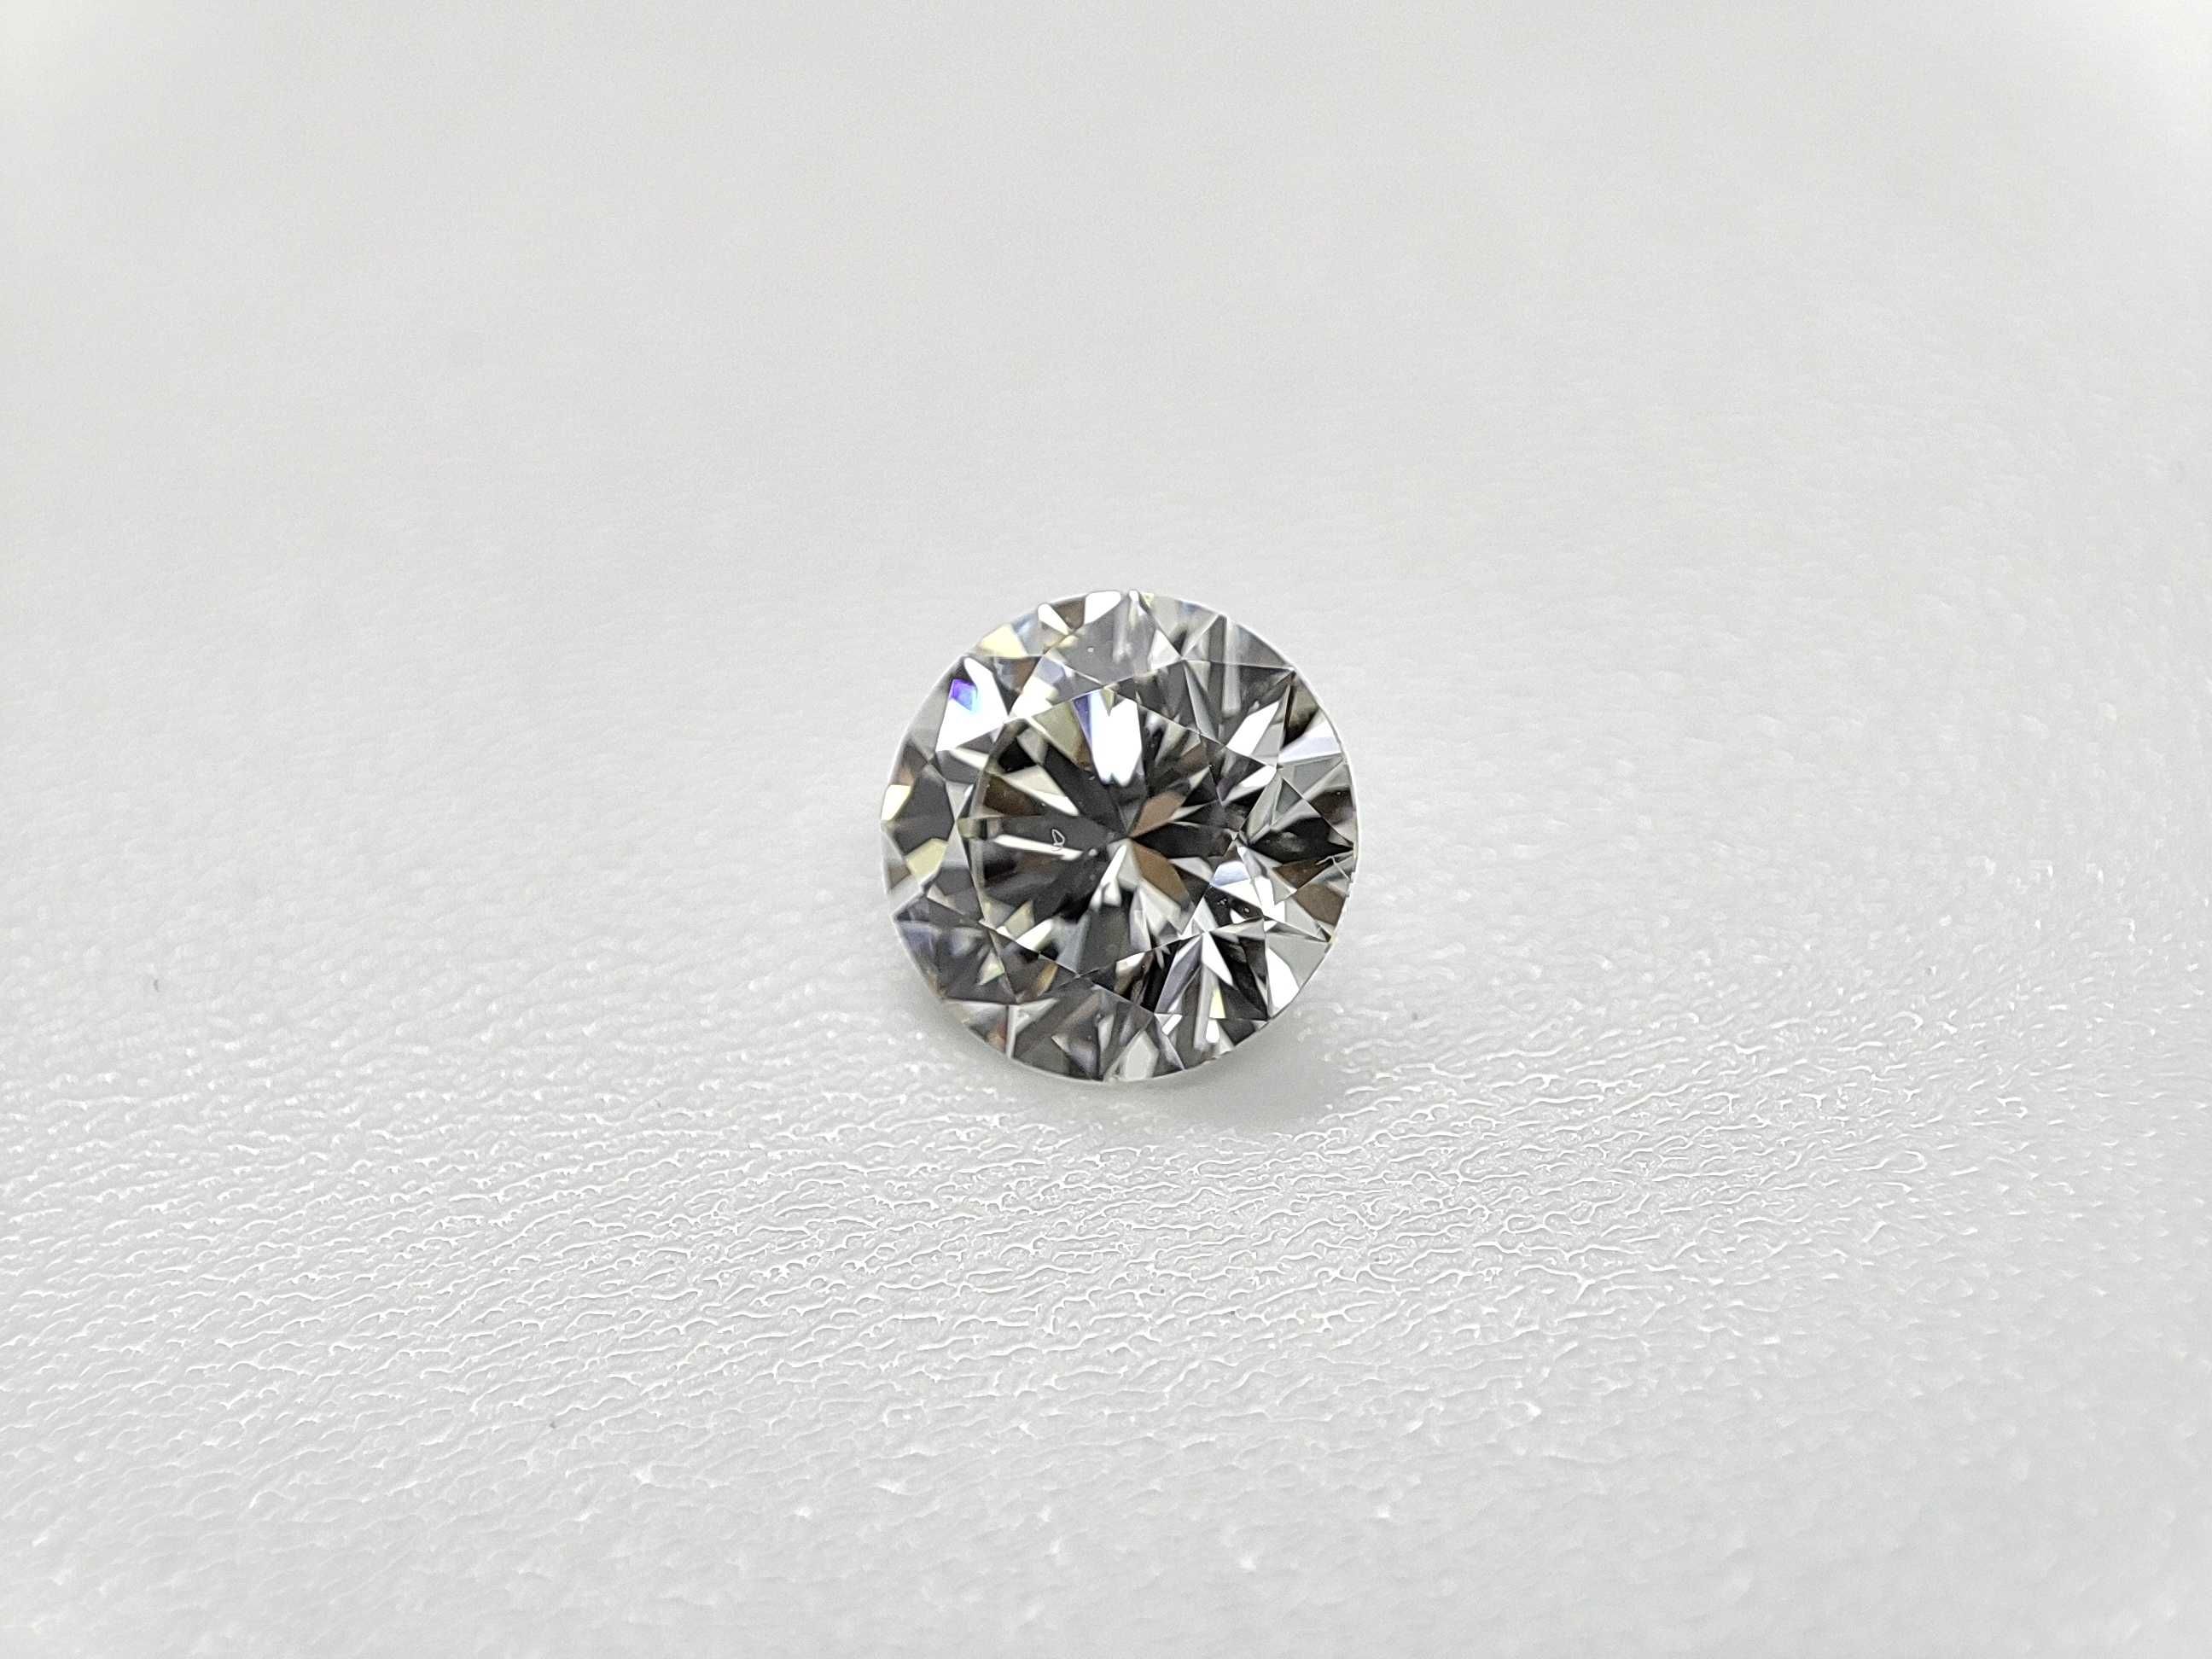 Brylant 0.55ct., H/VS2, ExExEx. GIA. Firma.